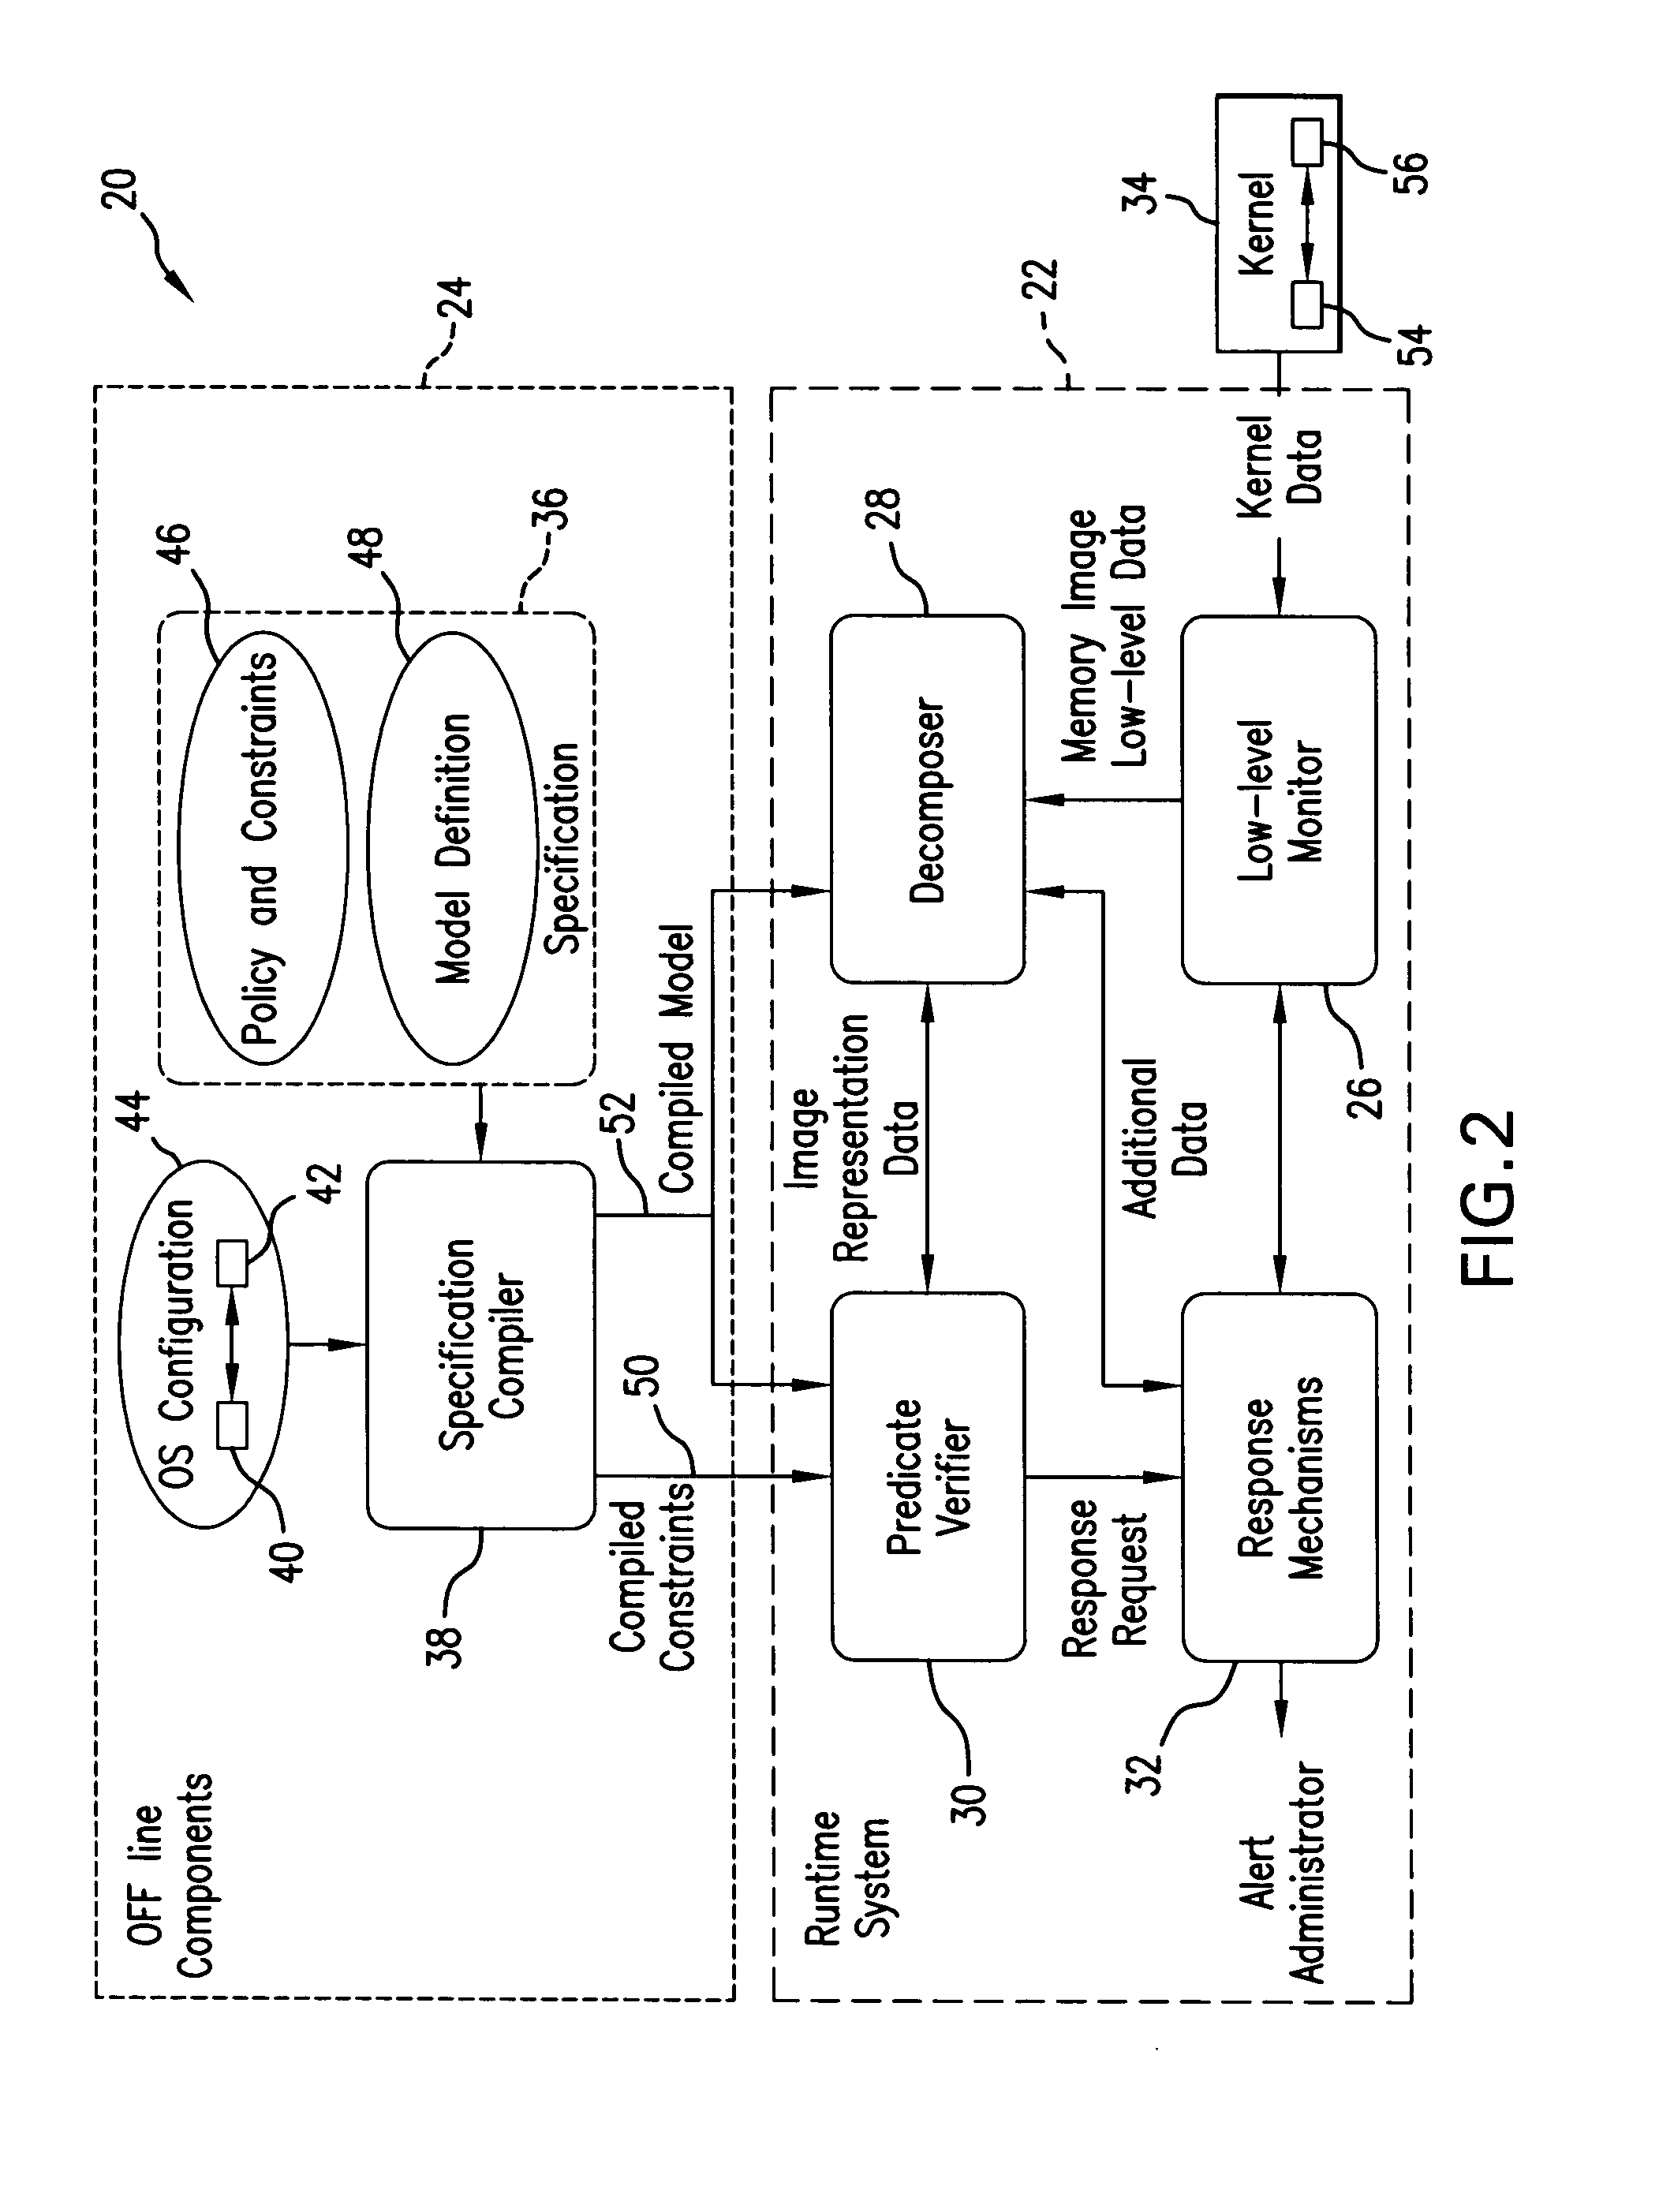 Method & system for monitoring integrity of running computer system